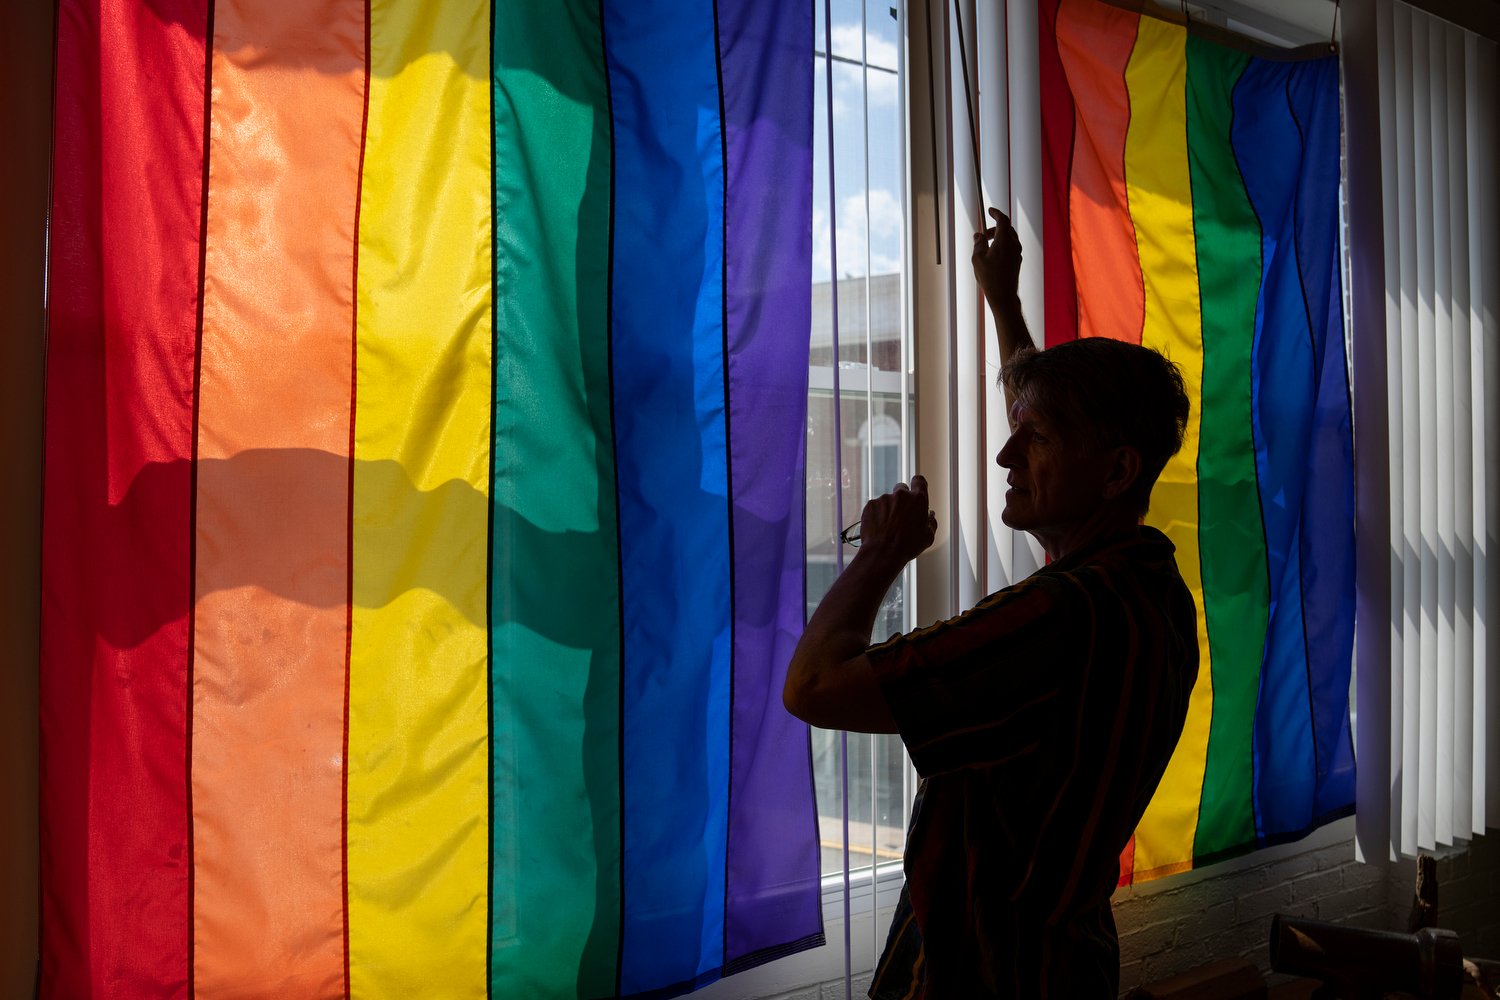  Tracy Brown-Salsman, 57, closes the blinds on his porch, where three large rainbow flags hang, Thursday, July 14, 2022.  